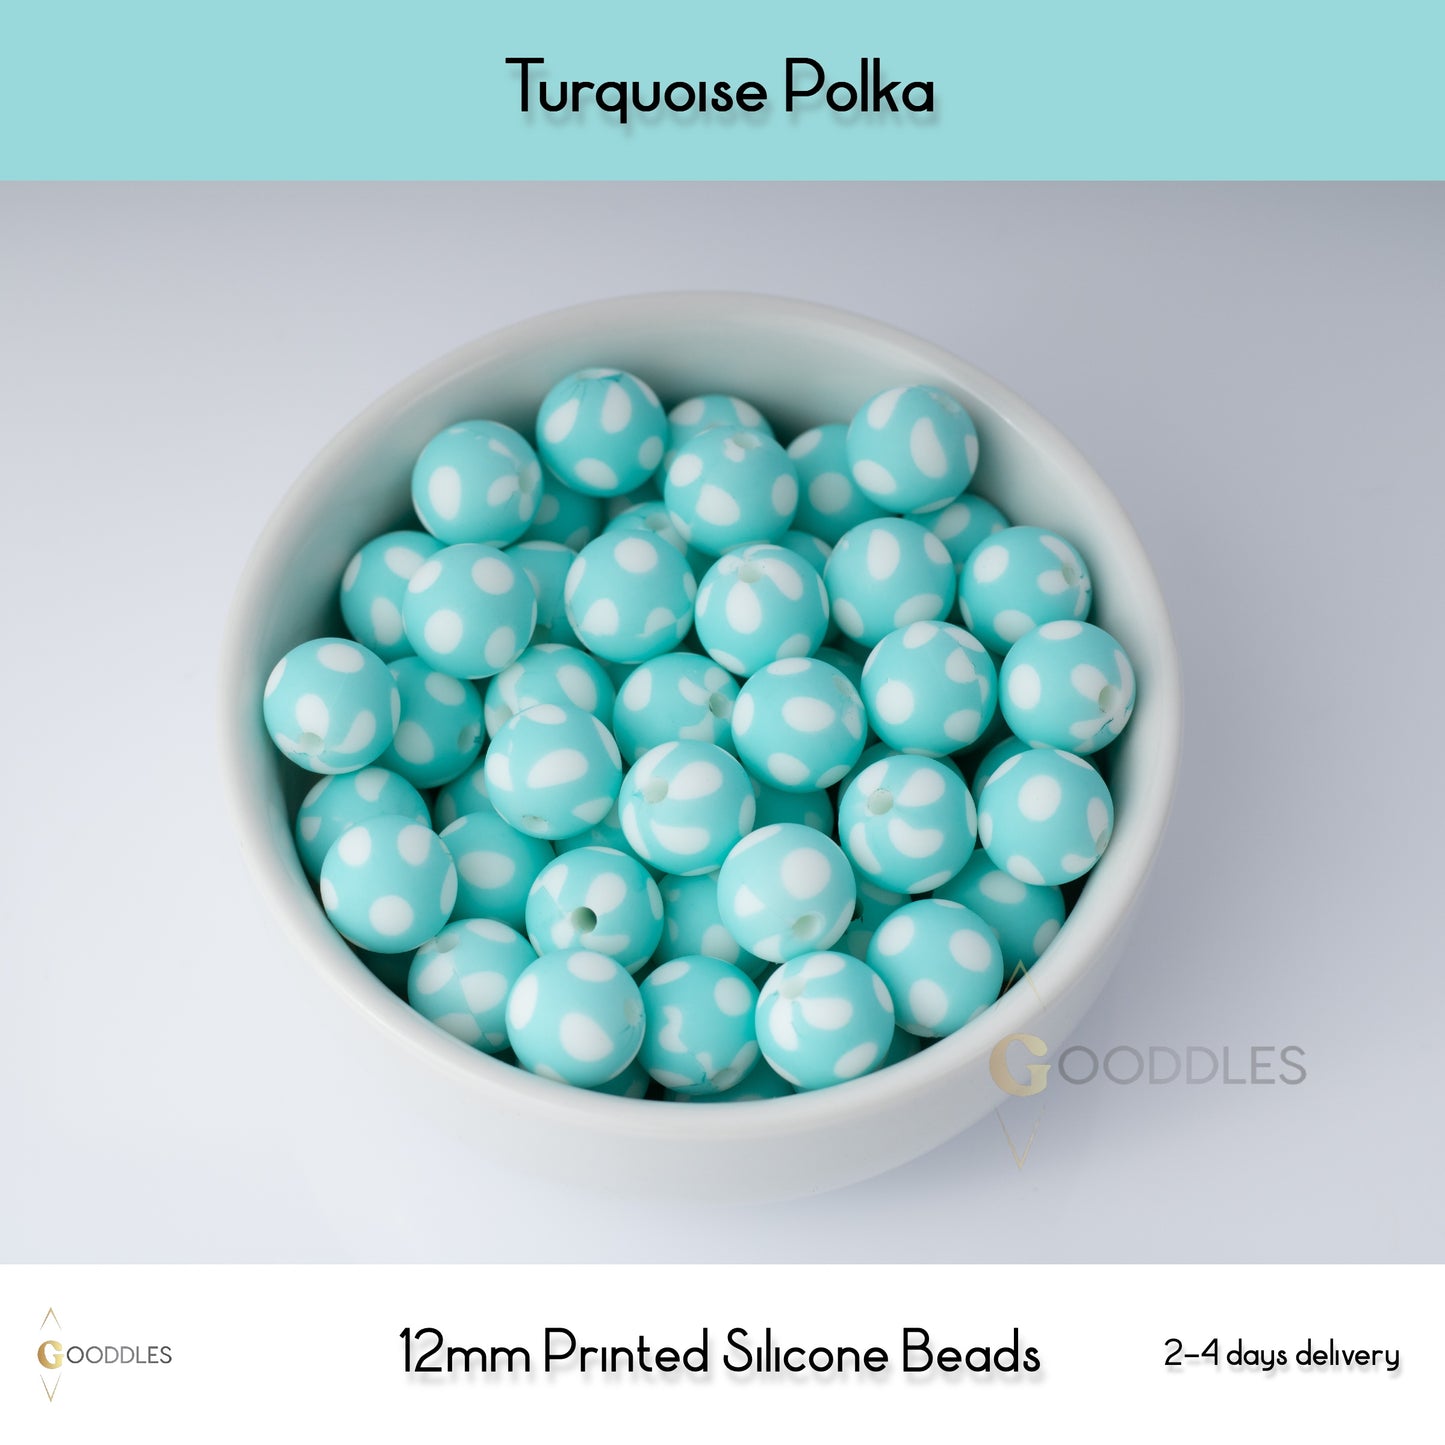 5pcs, Turquoise Polka Silicone Beads Printed Round Silicone Beads